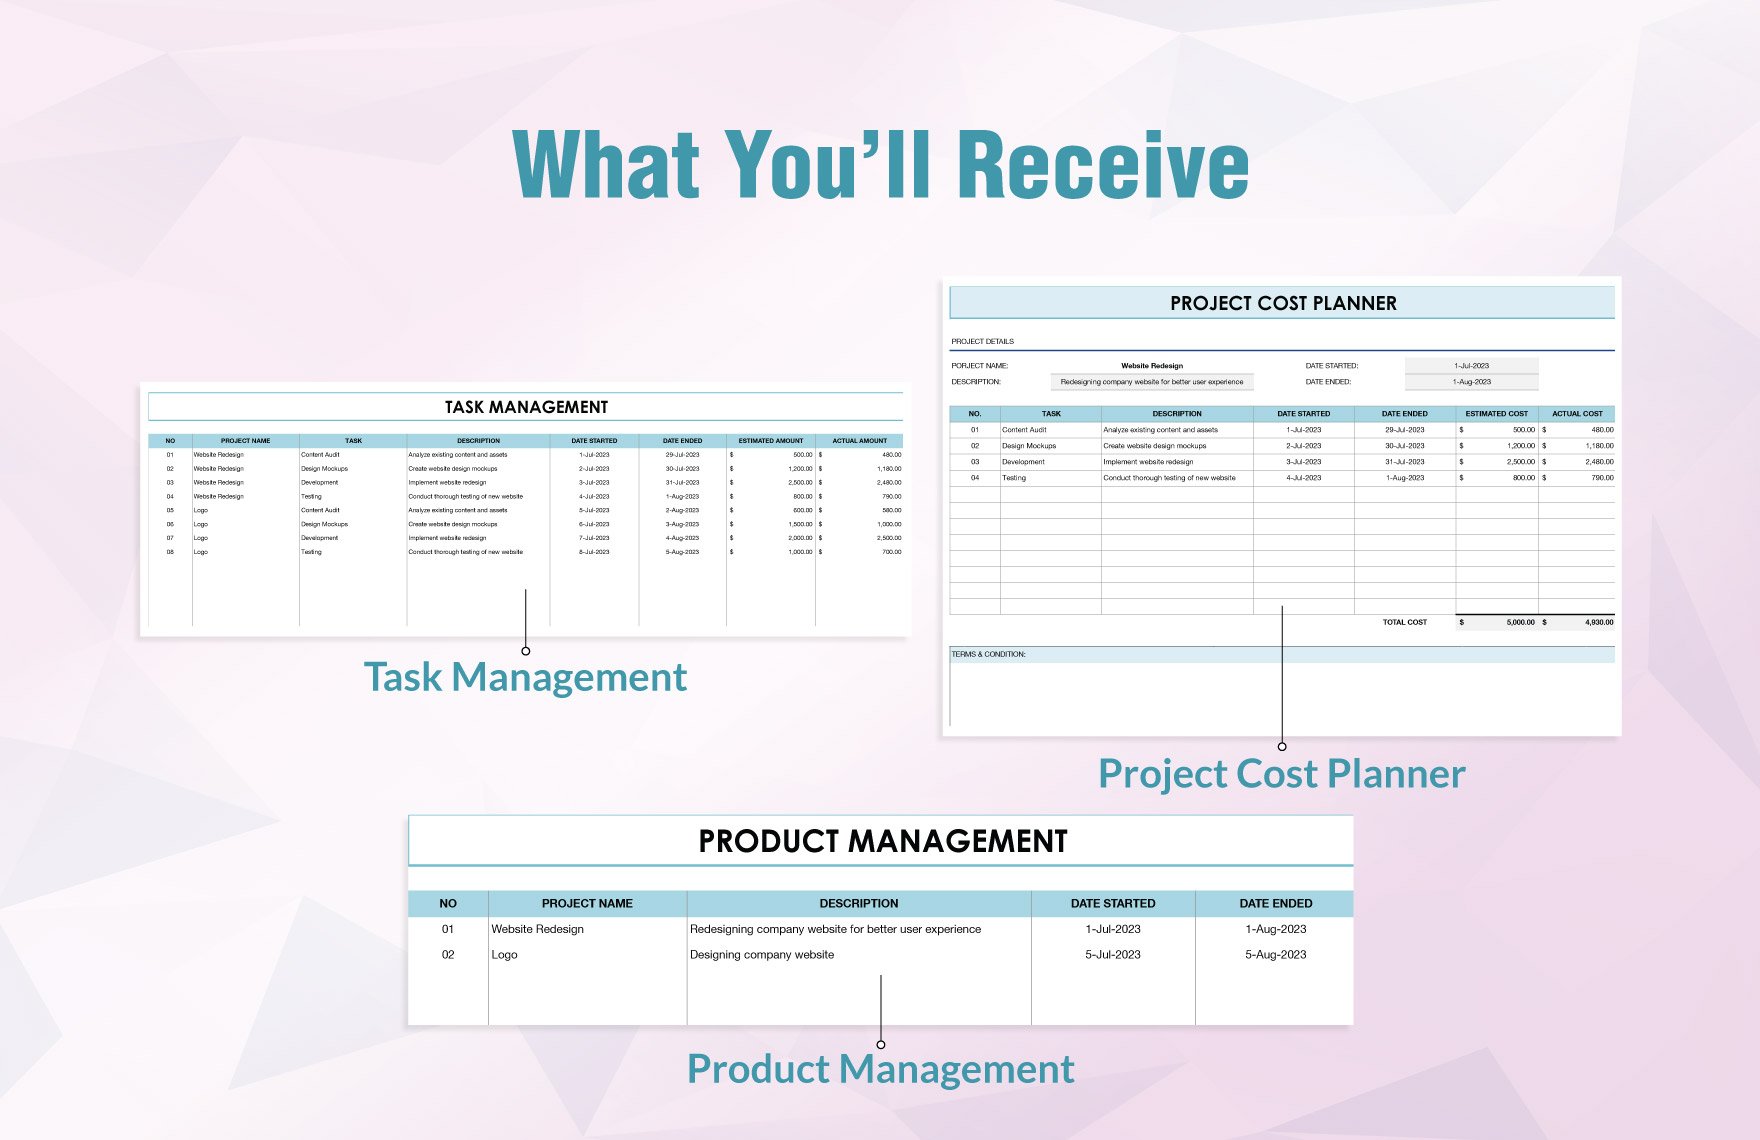 Project Cost Planner Template